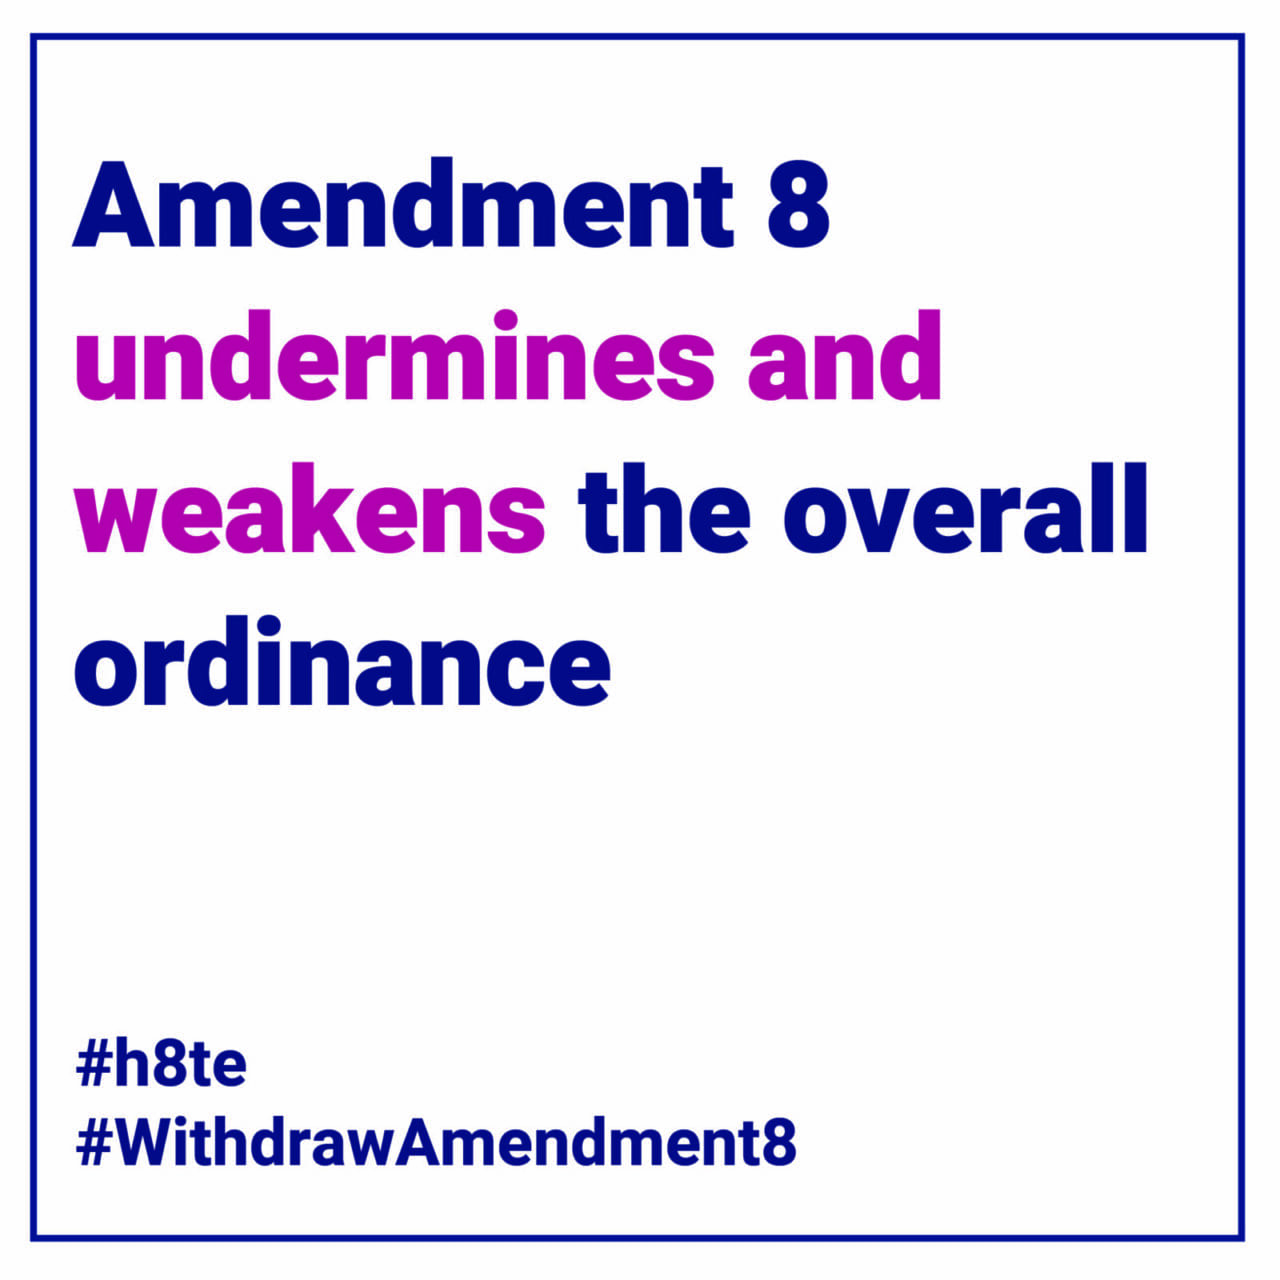 Amendment 8 undermines and weakens the overall Ordinance